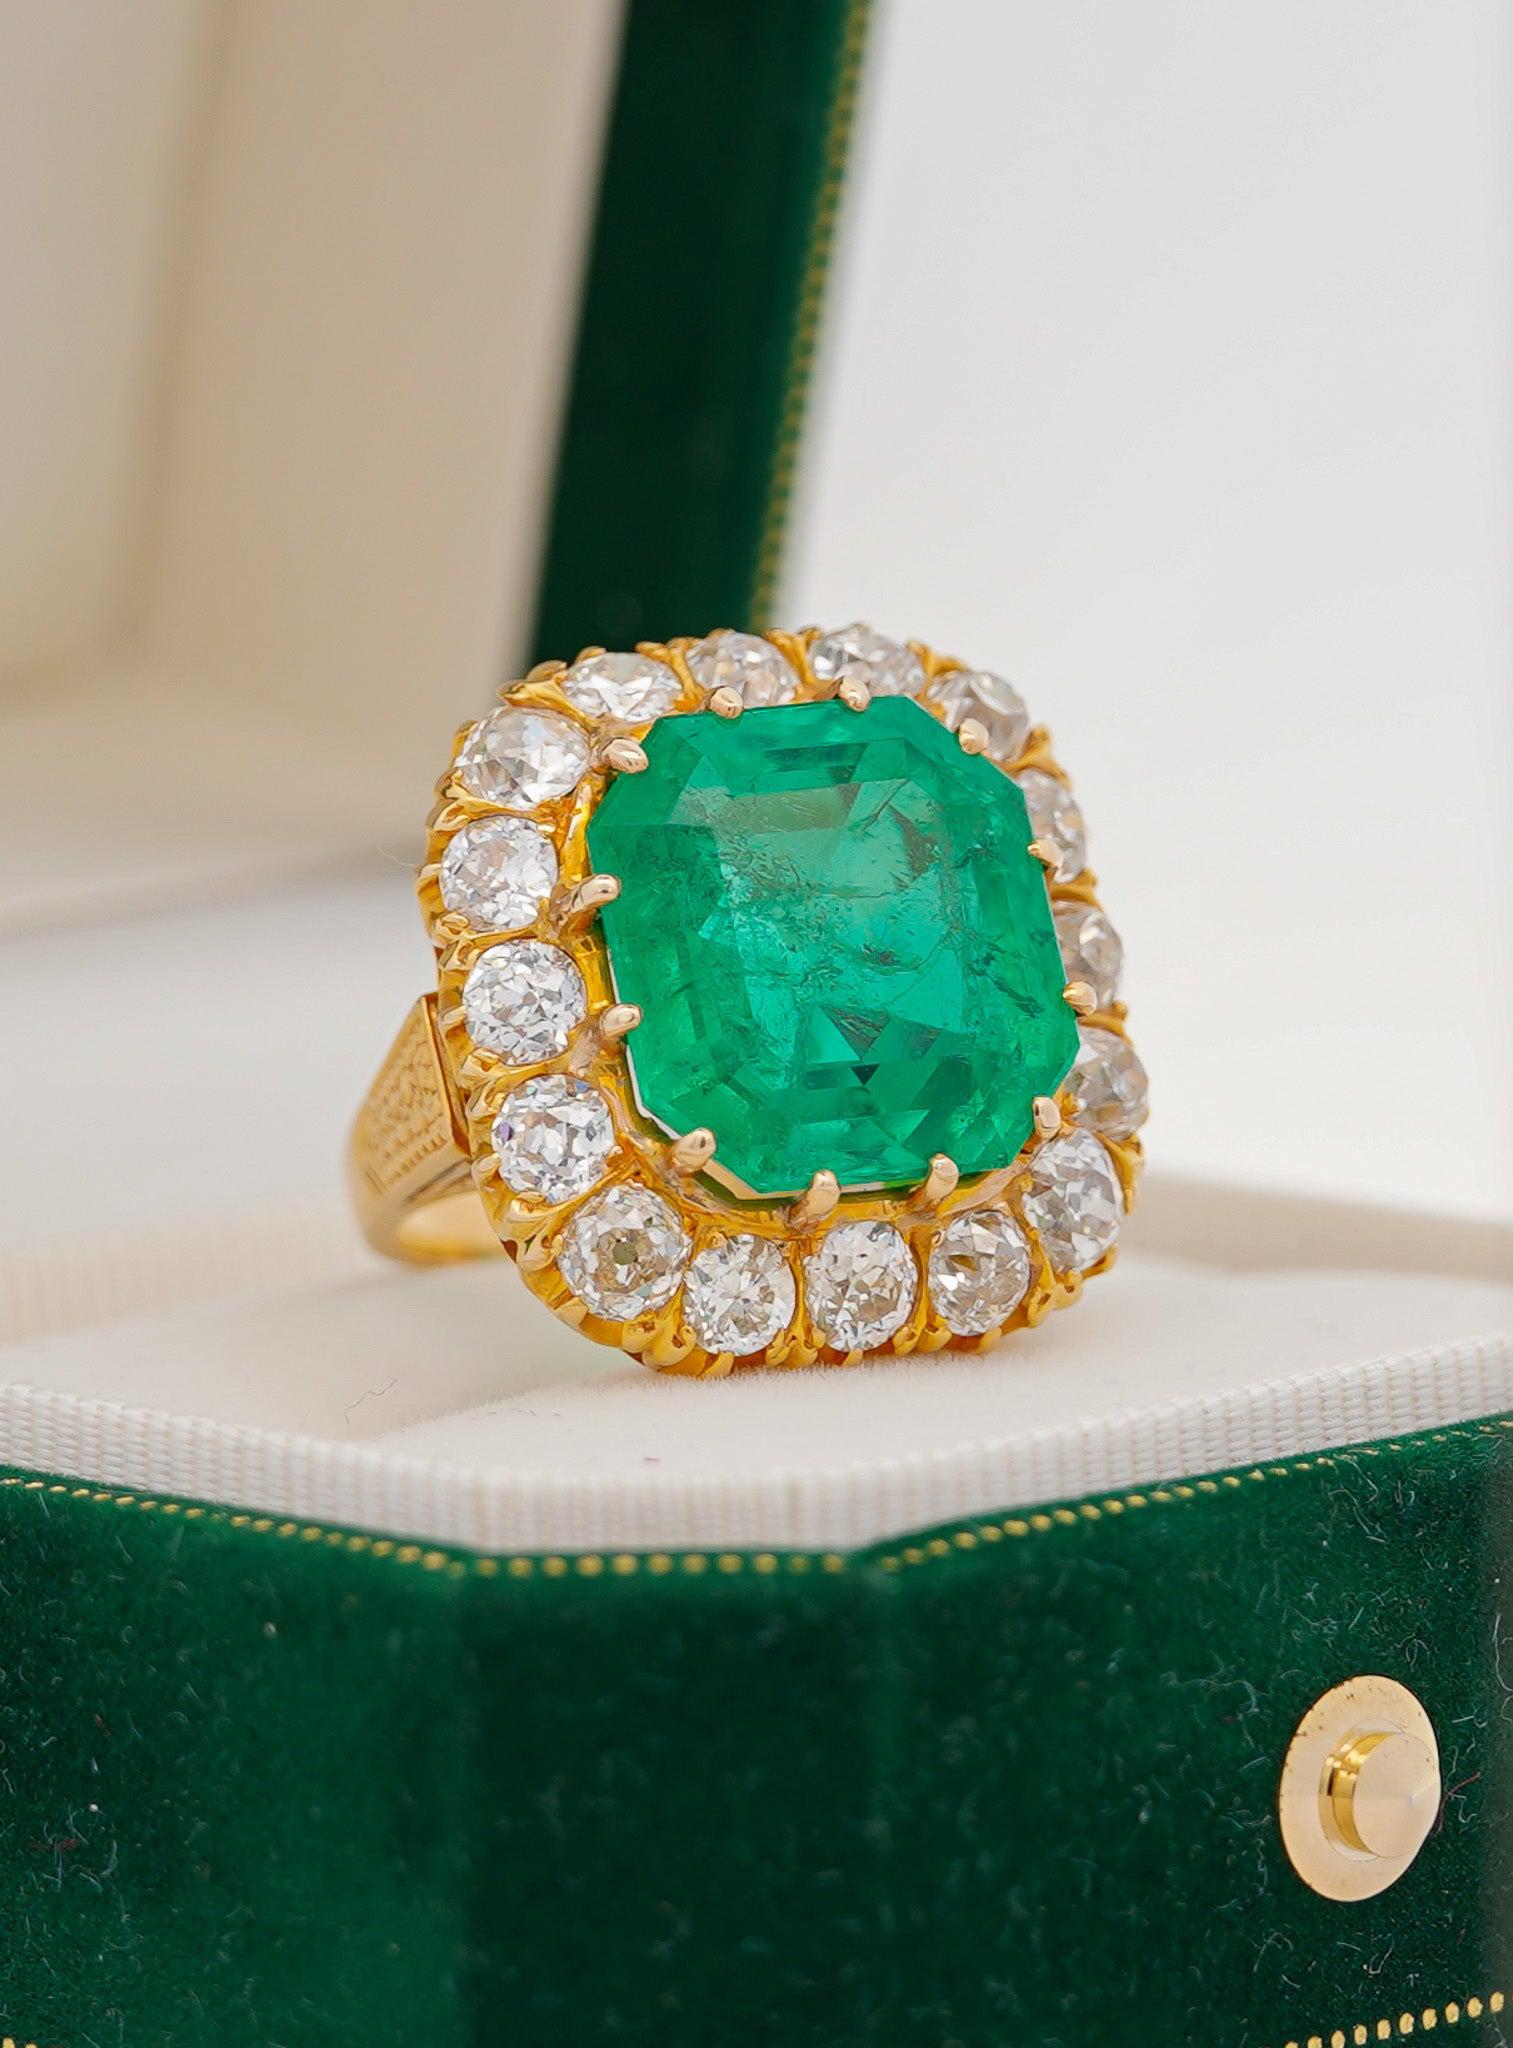 14.51 Carat Insignificant Oil Colombian Emerald & Old Euro Cut Diamond Halo Ring